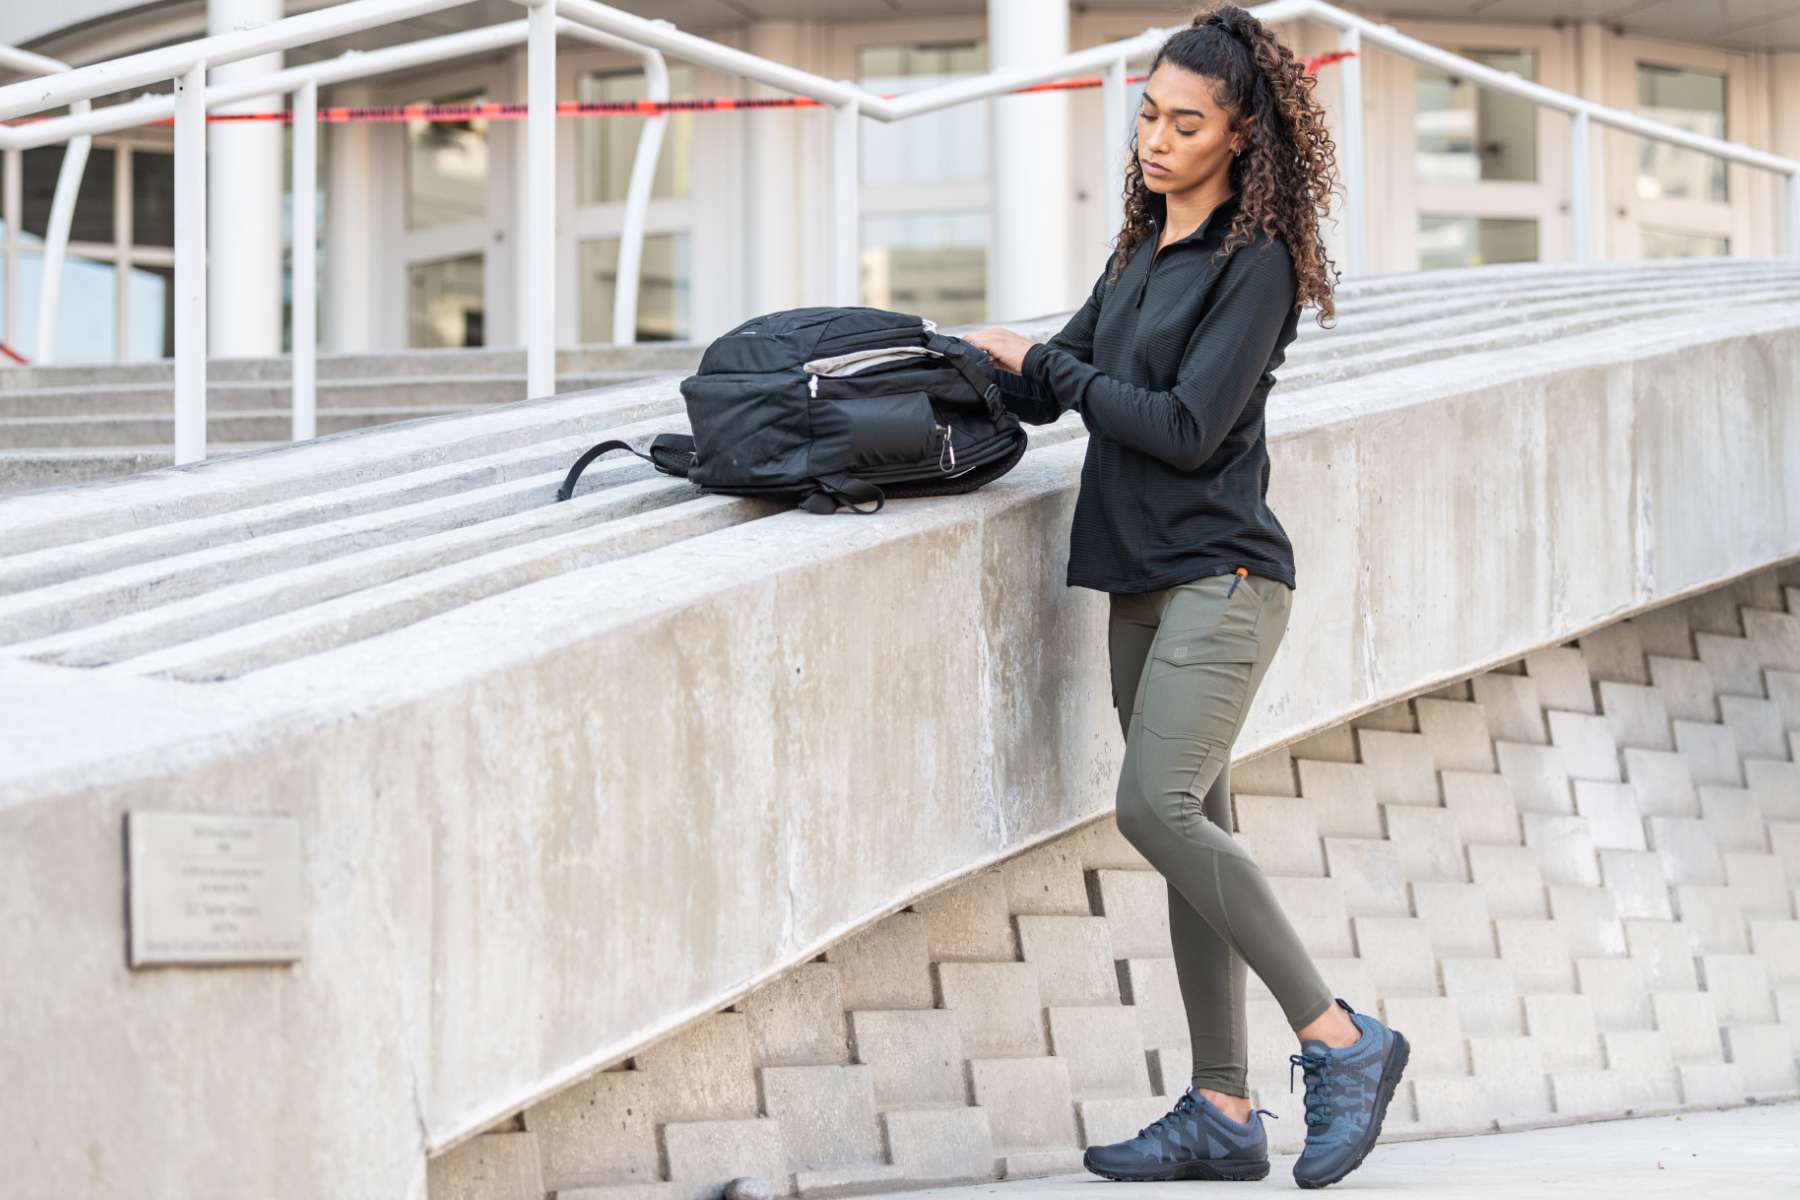 Exercise Clothes You Can Get Away With at the Office - Office